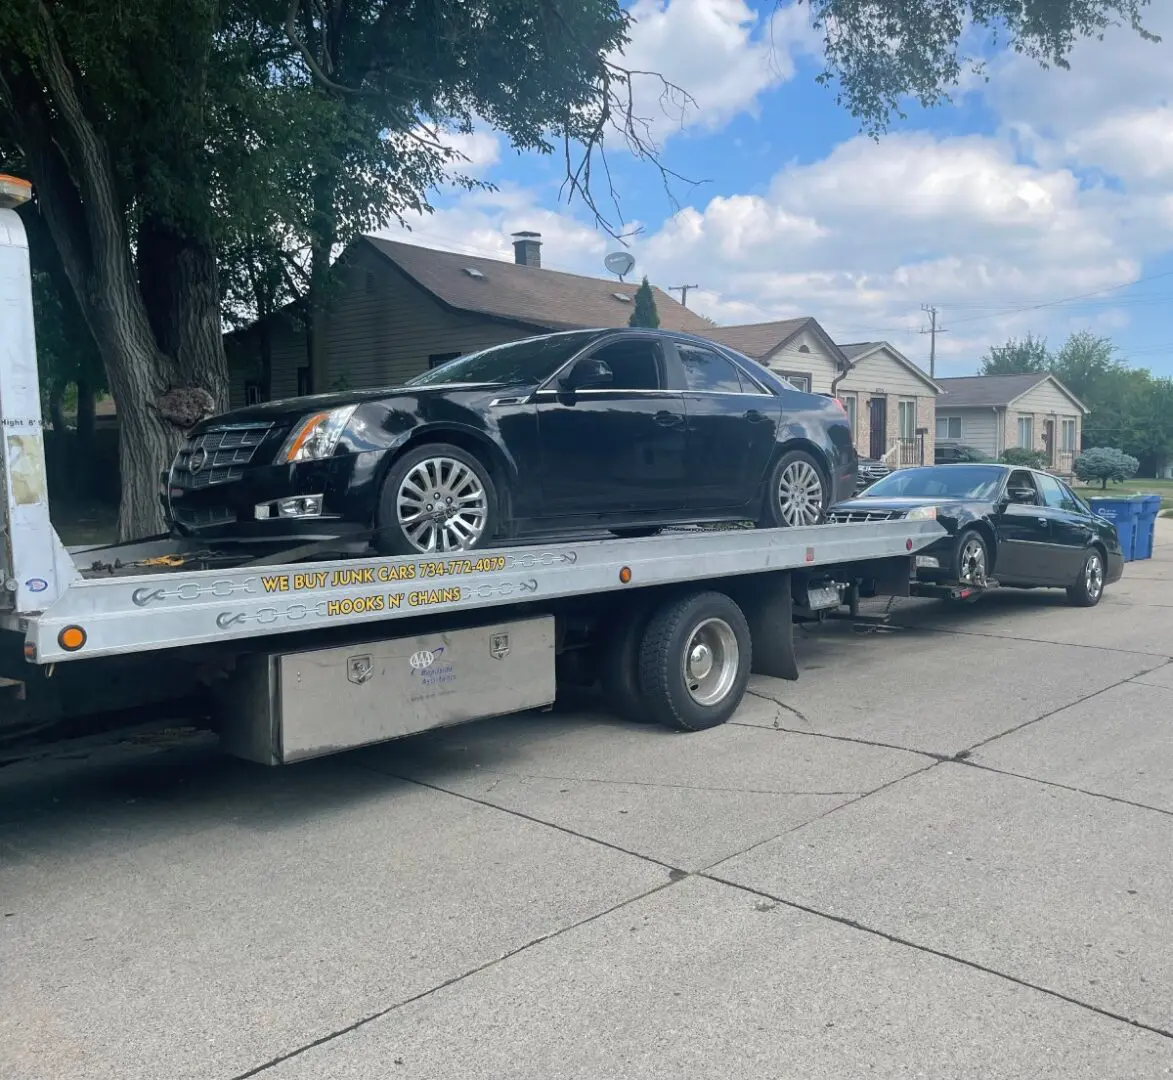 A car is being towed by a tow truck.